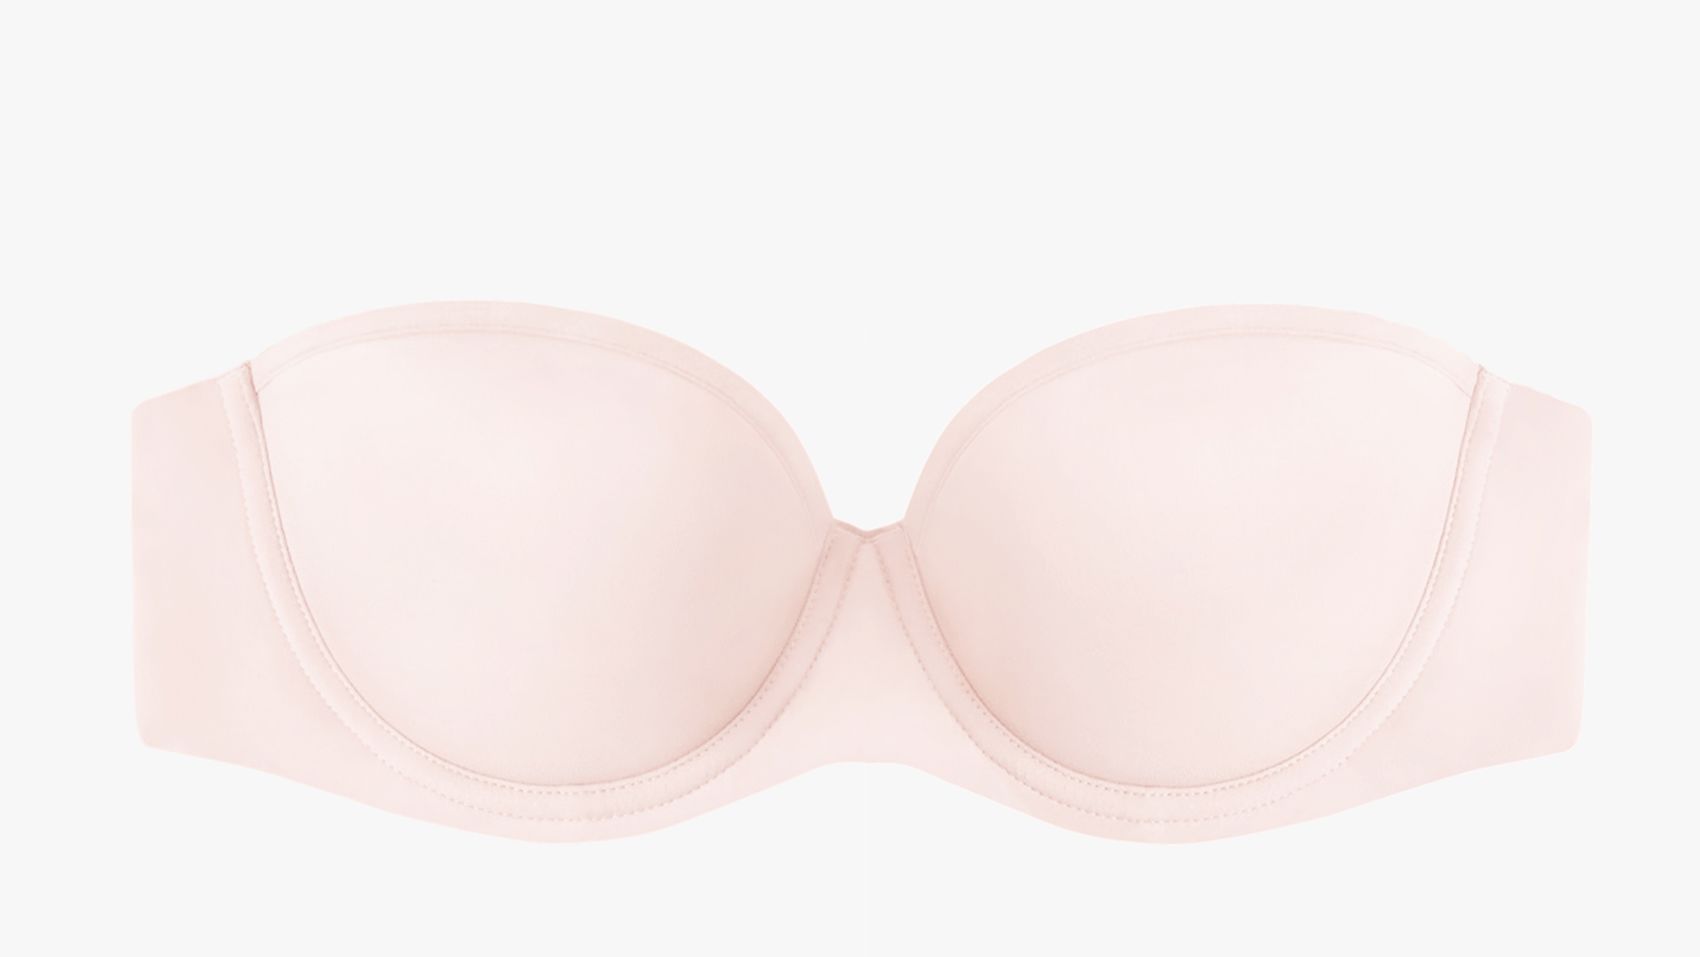 We tried the bra that thousands agree is the most comfortable on the planet